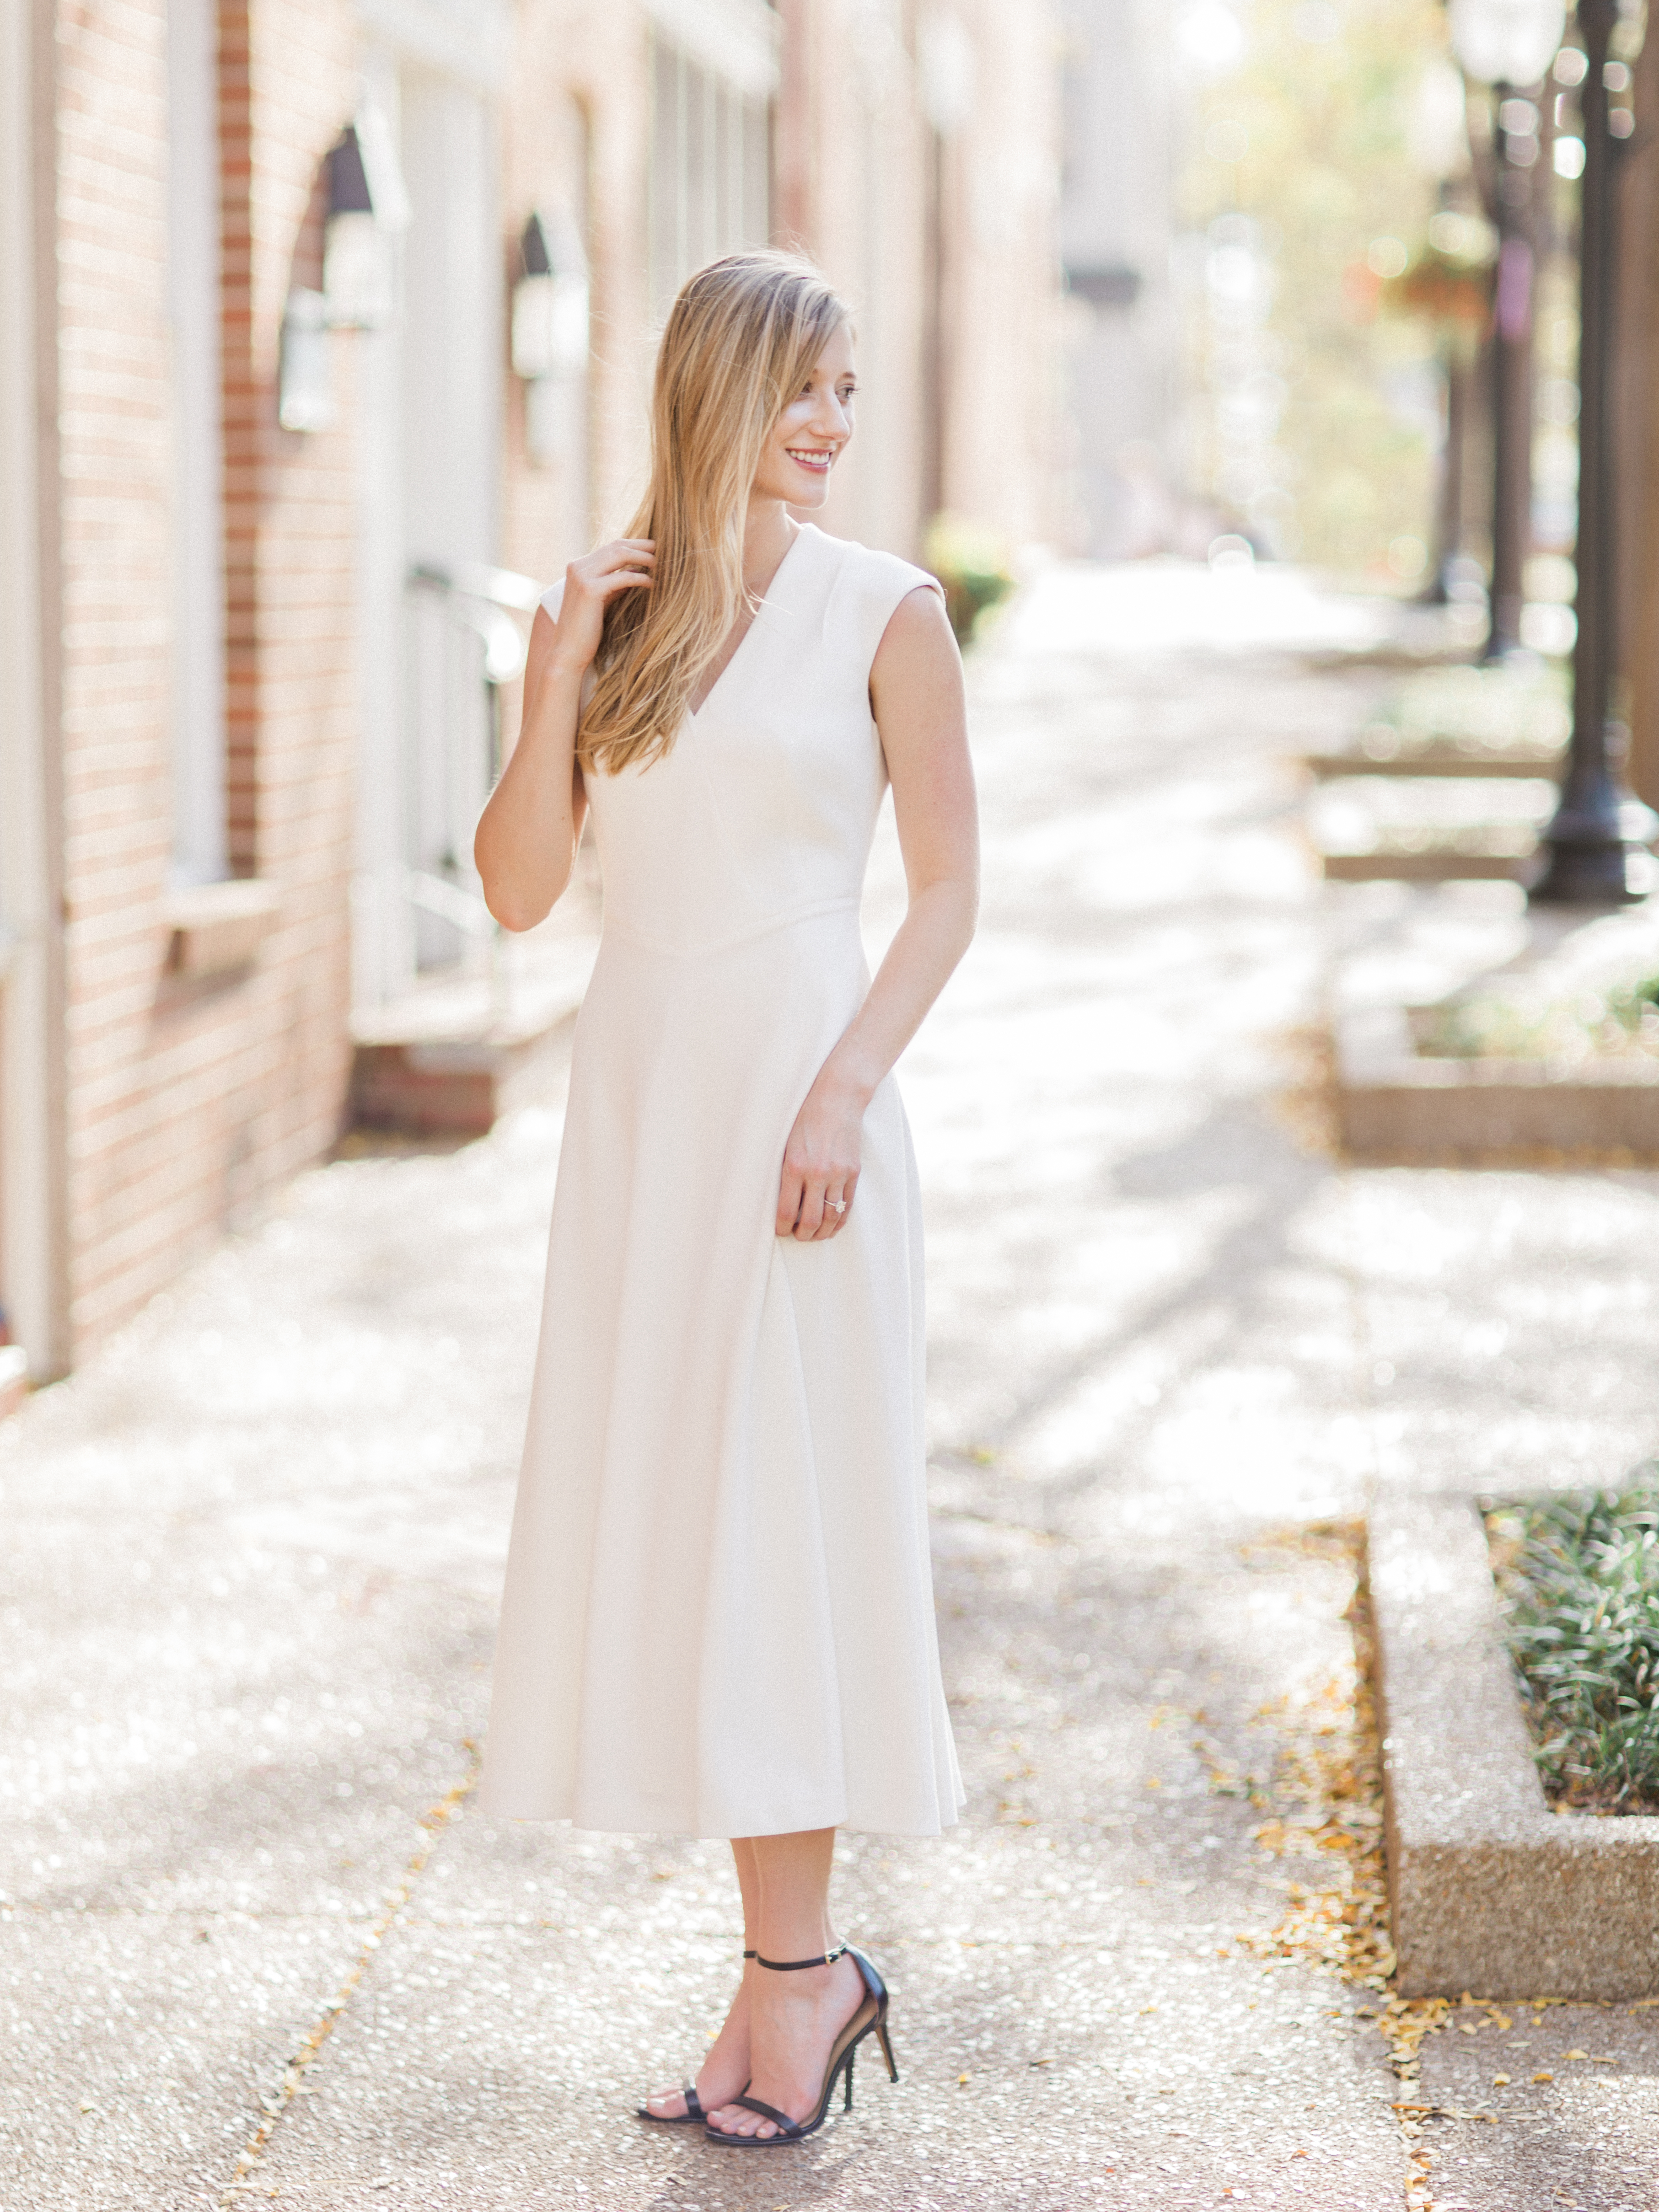 Beautiful Bride-to-be captured in Jefferson City, MO by Love Tree Studios.